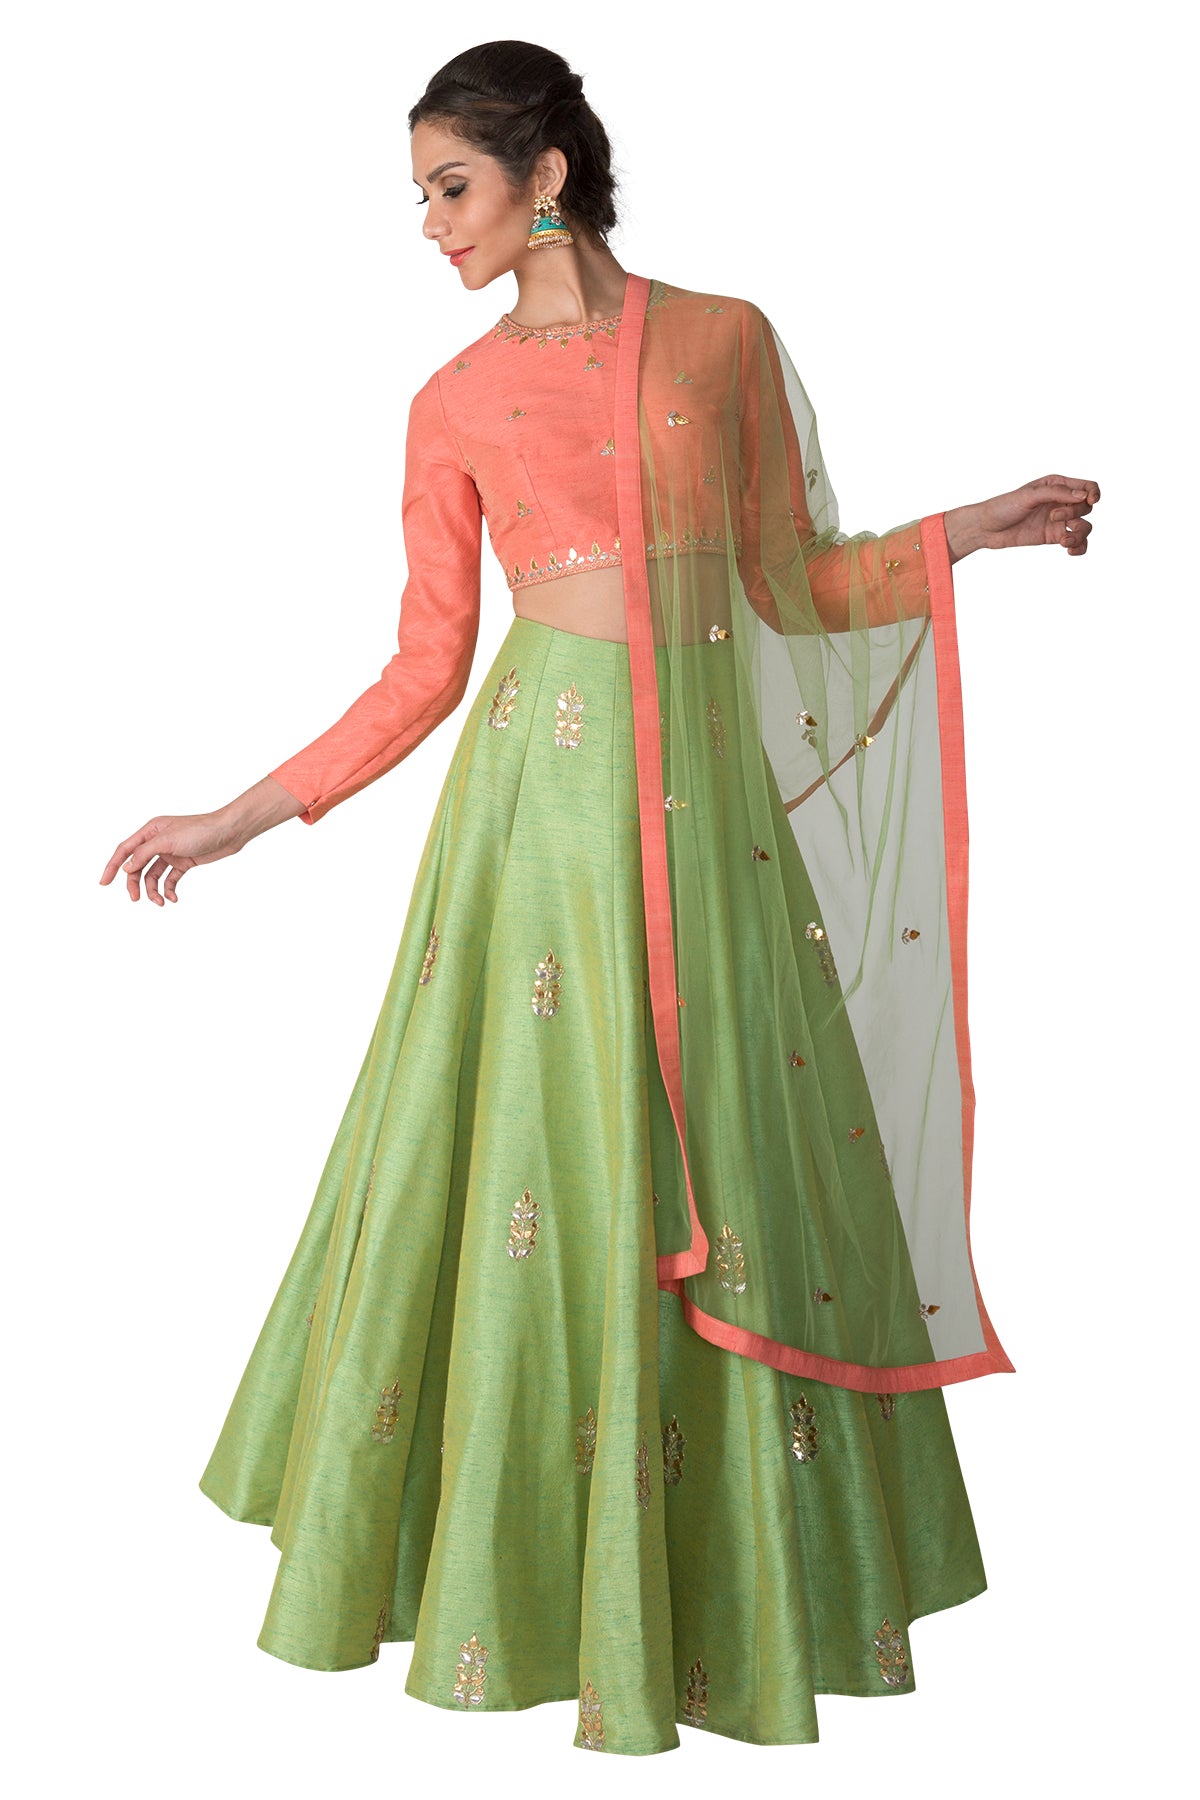 Let this outfit bring a whiff of that perfect pastel palette to your wedding wardrobe with its peach embroidered full-sleeve blouse, green gota lehenga & green net dupatta.